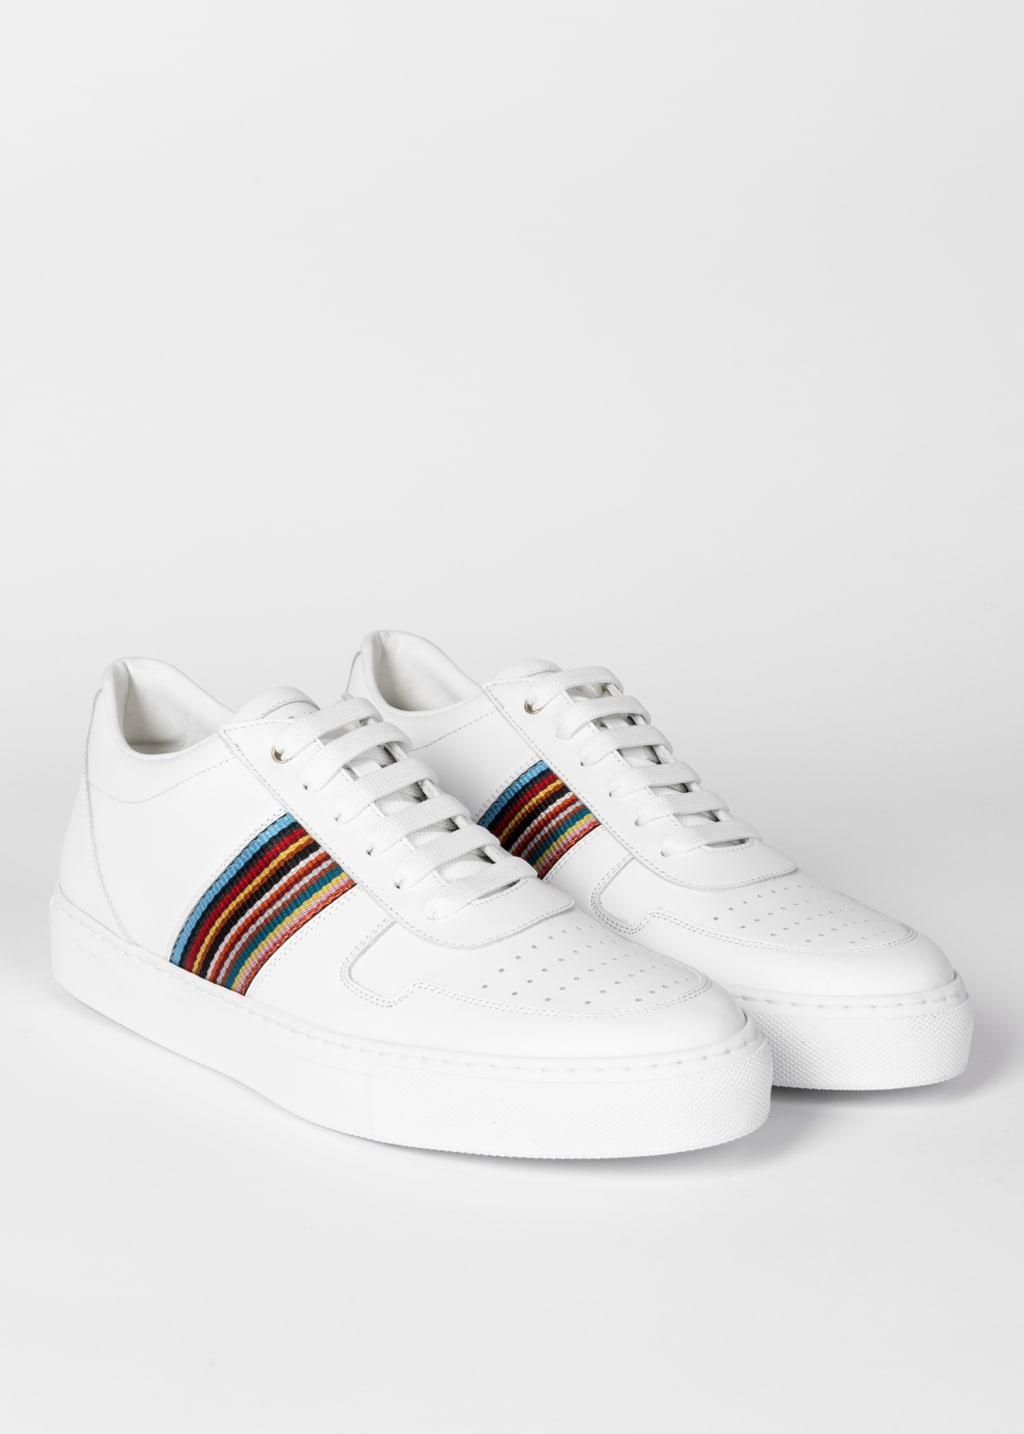 Pair View - White Leather 'Fermi' Trainers Paul Smith